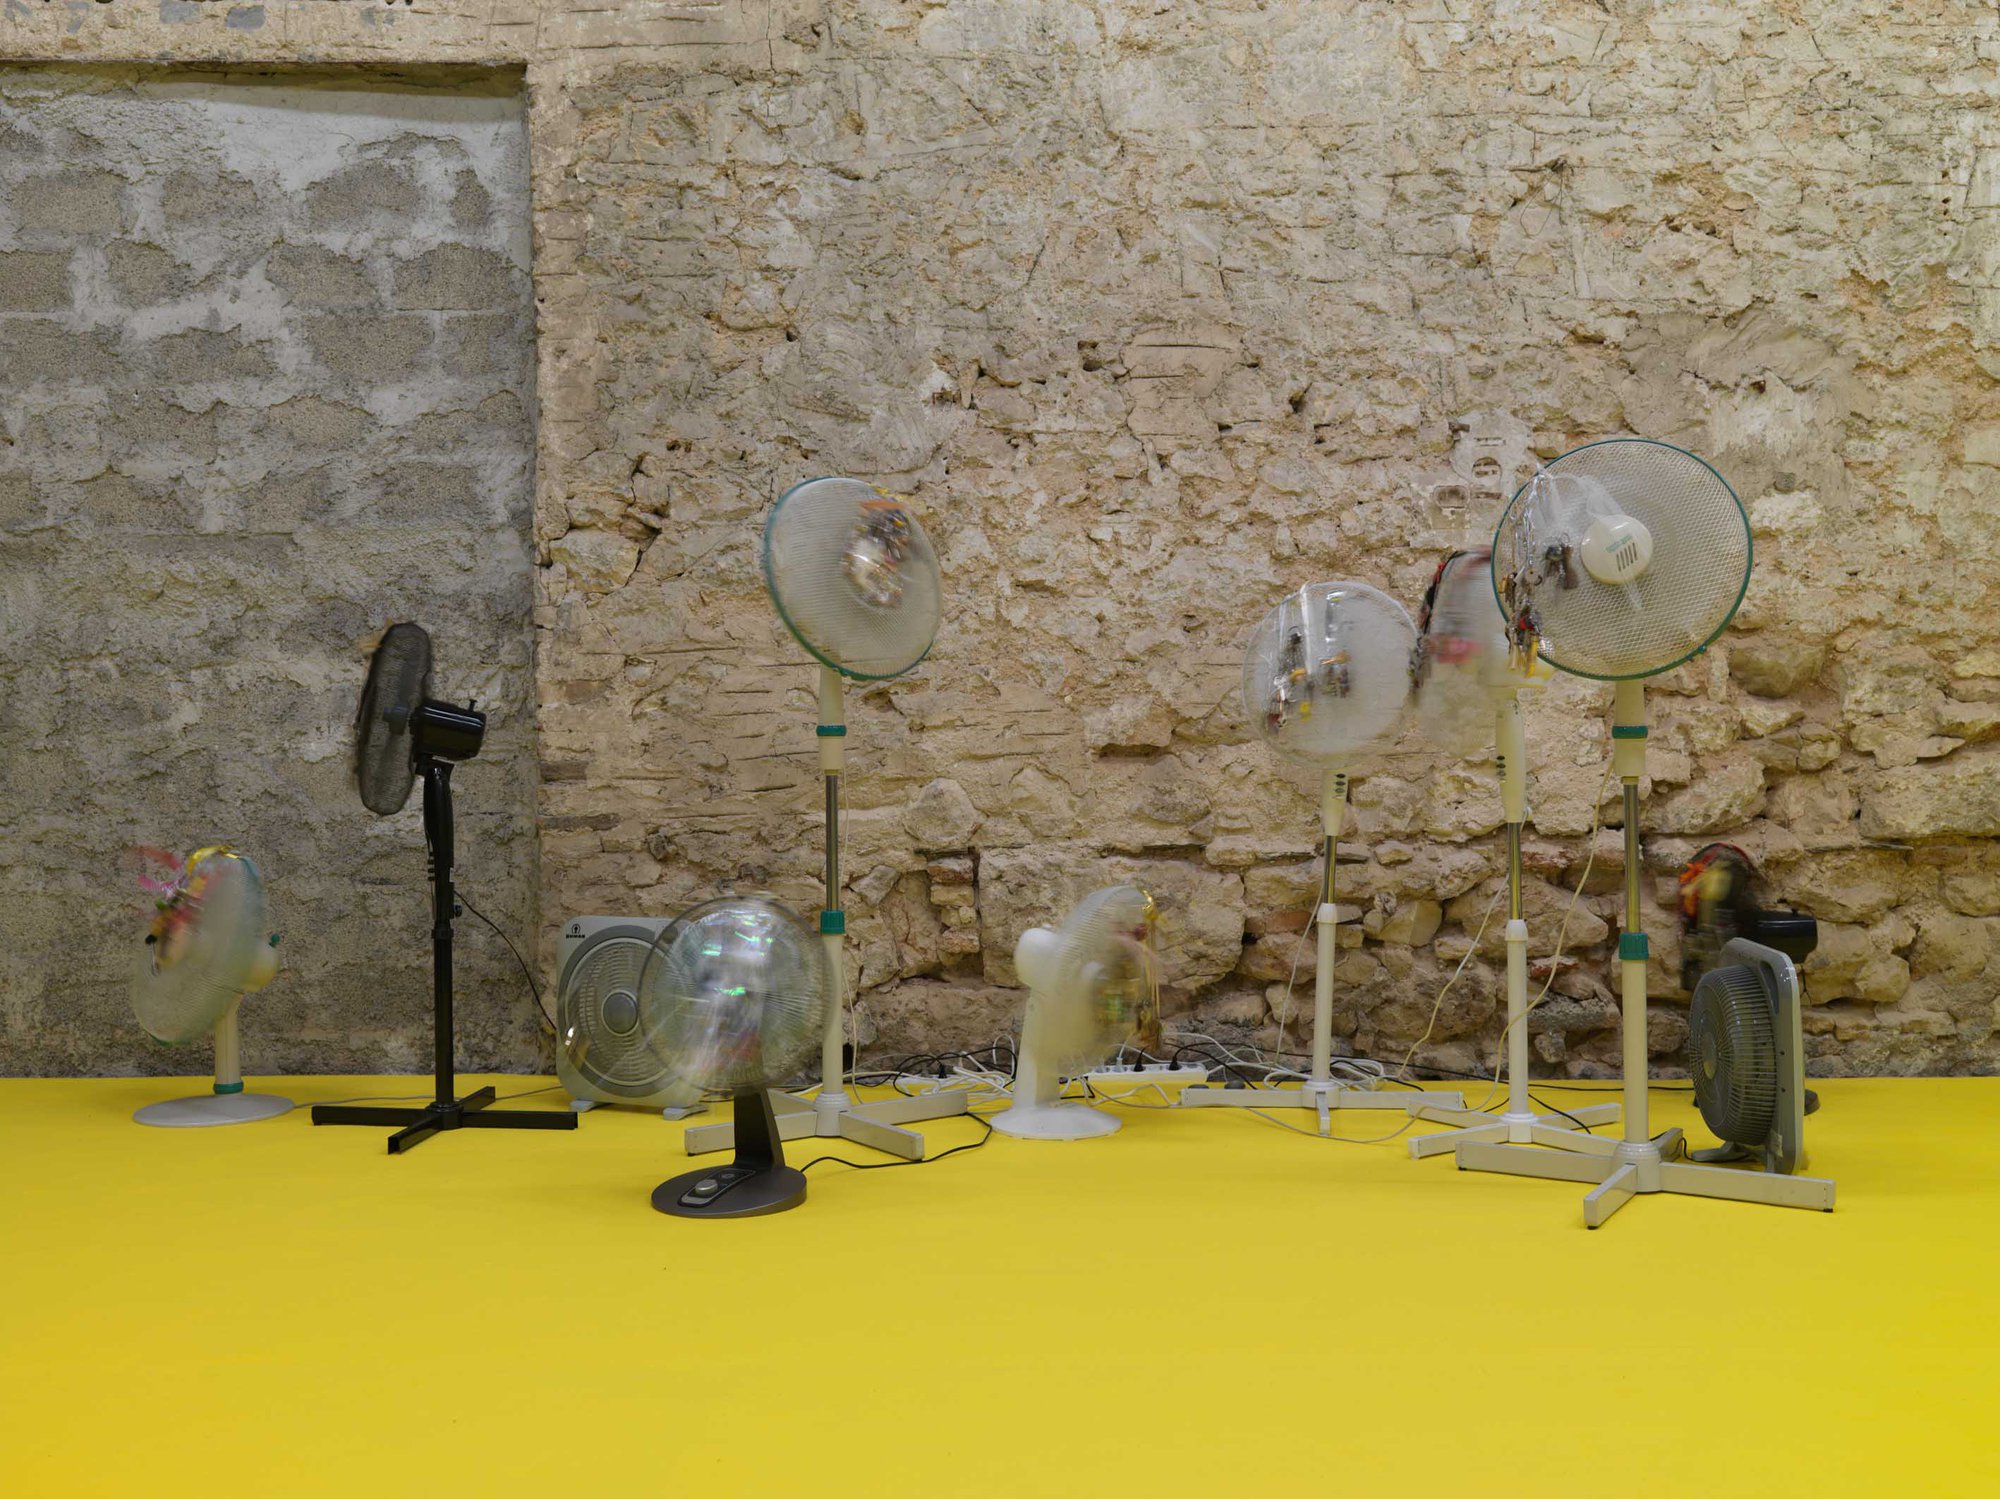 Iris Touliatou, Emotional Infinity (The sound of them coming back amplified and looped), oscillating fans, house keys, key chains, string, ribbons, gift bows, wire, timers, multiplugs, outlets, dimensions variable, 2022. Installation view, anabasis*, Rodeo, Piraeus, 2022